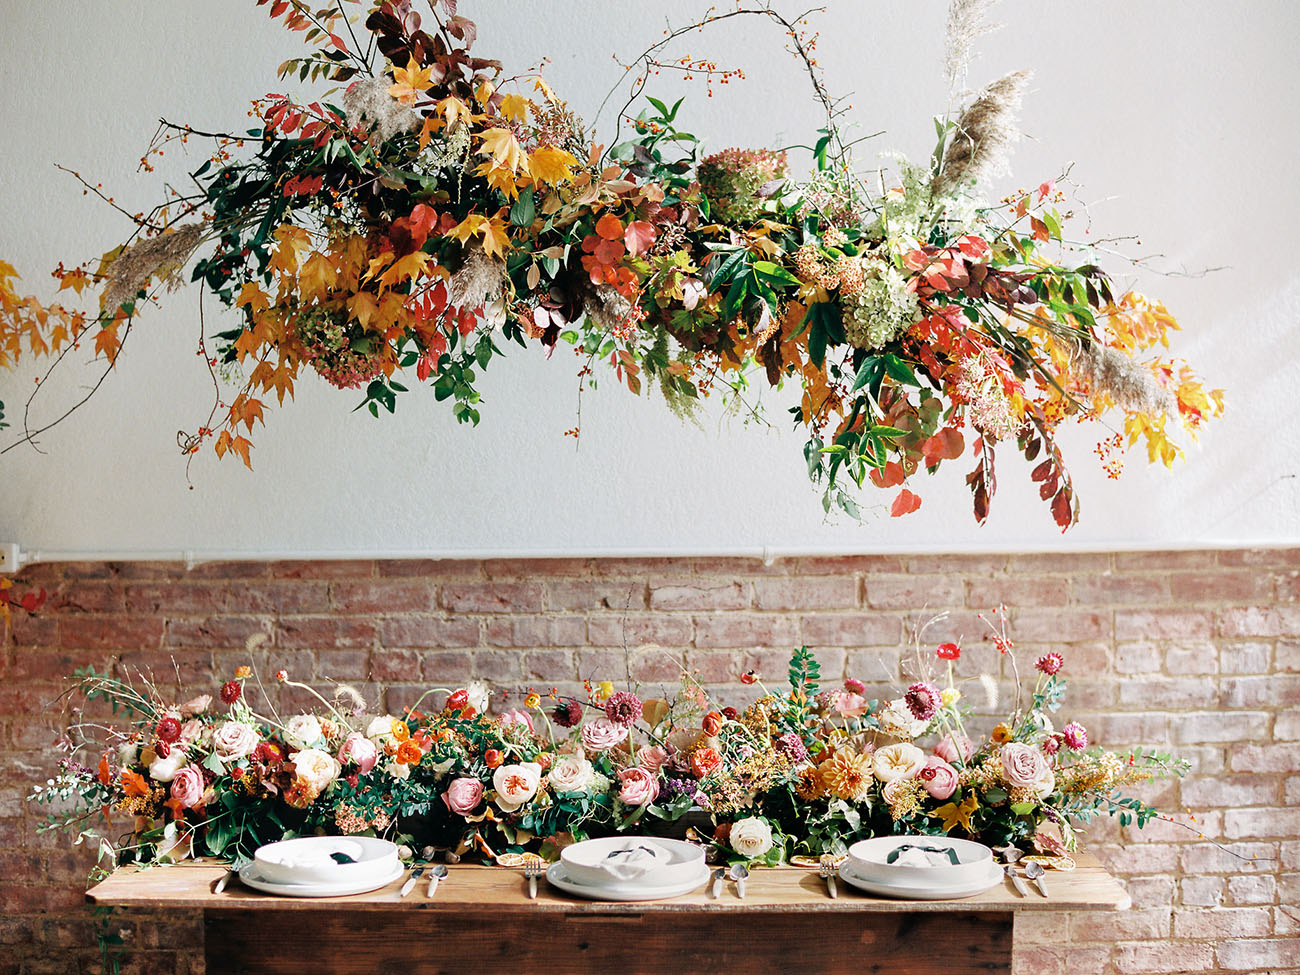 The wedding reception featured a lot of lush and bold florals that brought truly a fall spirit